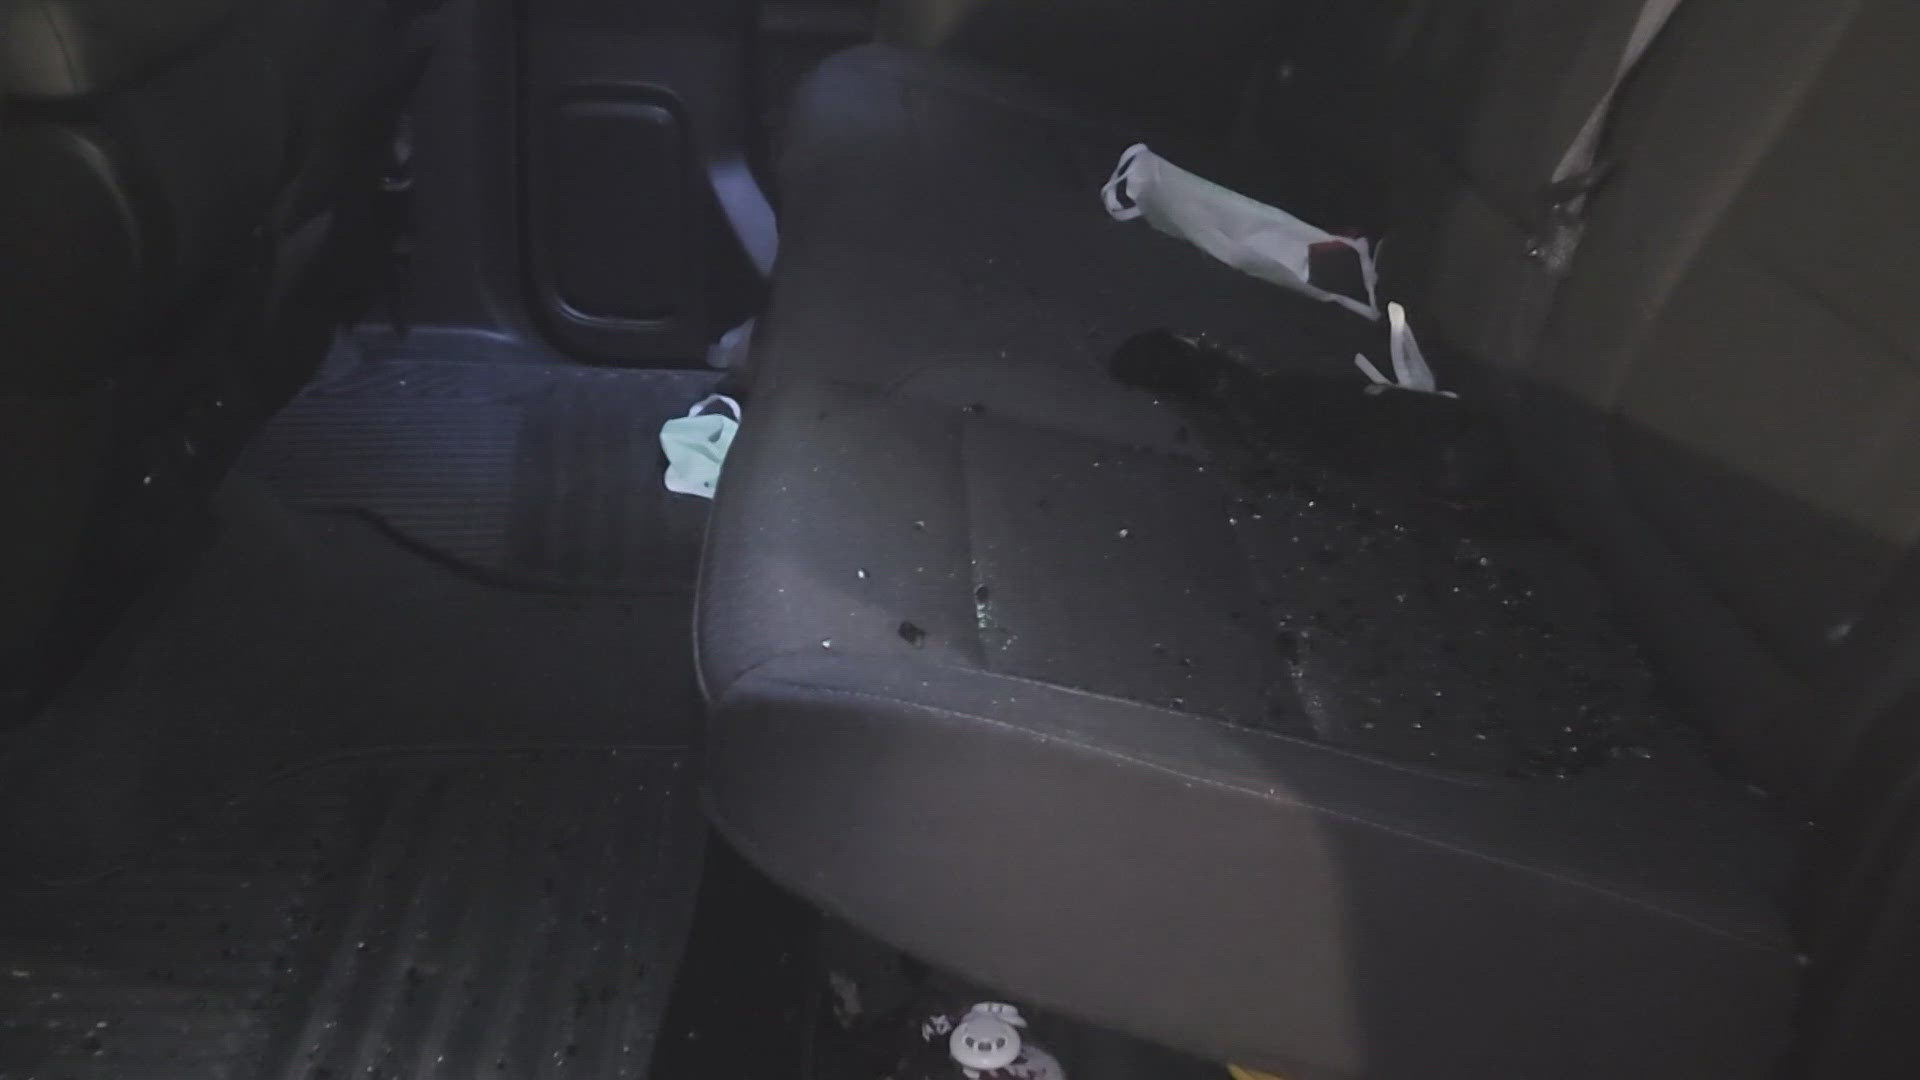 Several cars were broken into Wednesday night in the parking lot of the Planet Fitness on Lindell Boulevard. This happened even with a decoy police car nearby.